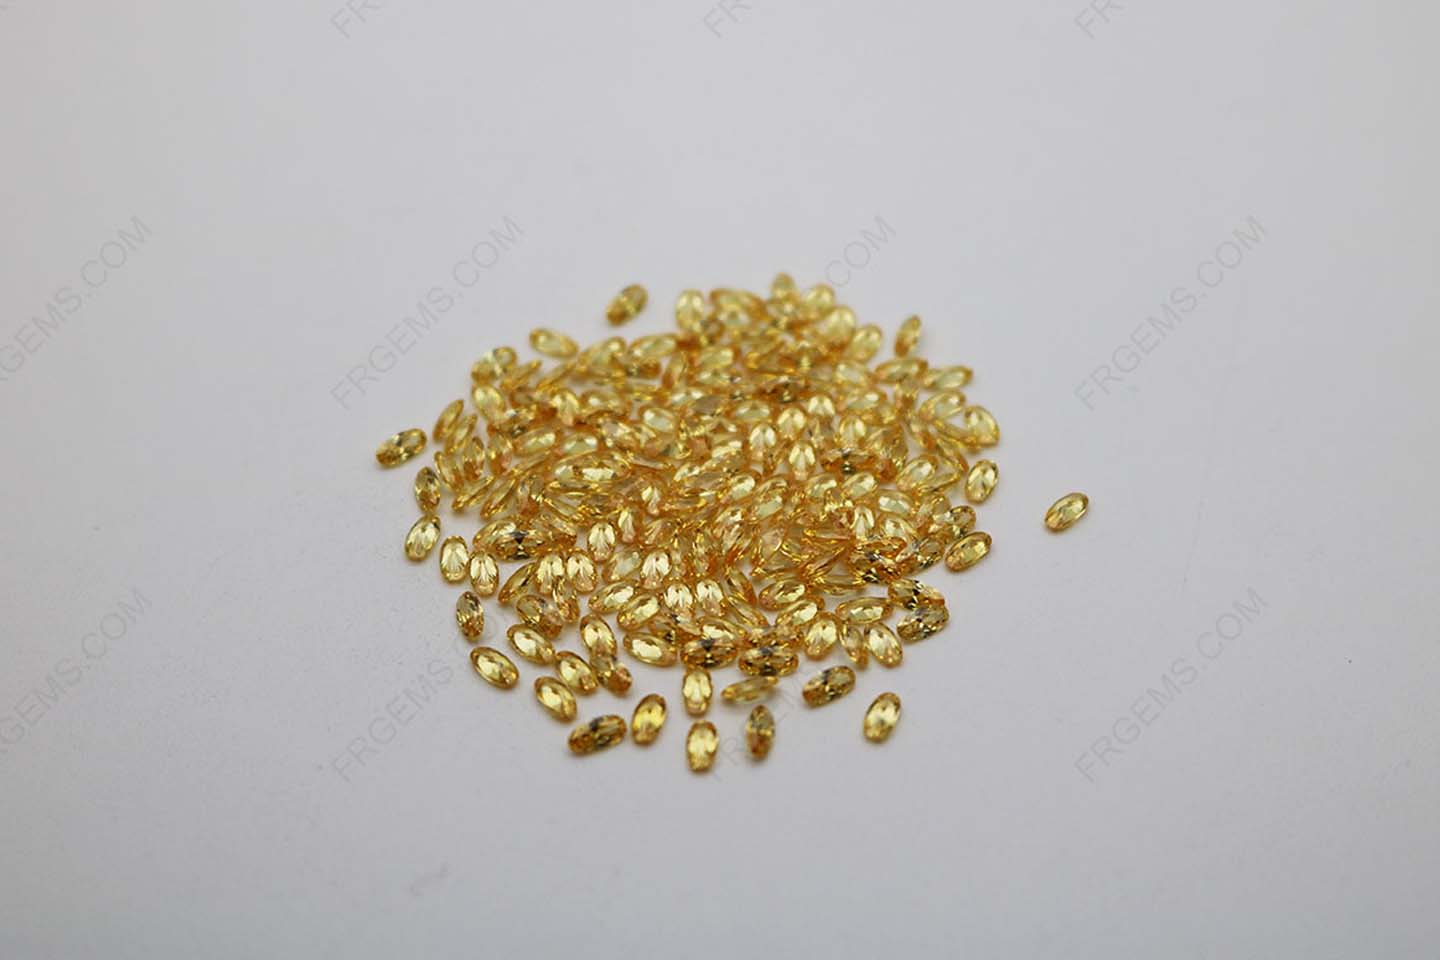 Cubic Zirconia Golden Yellow Oval Shape faceted diamond Cut 4x2mm stones CZ05 IMG_1048